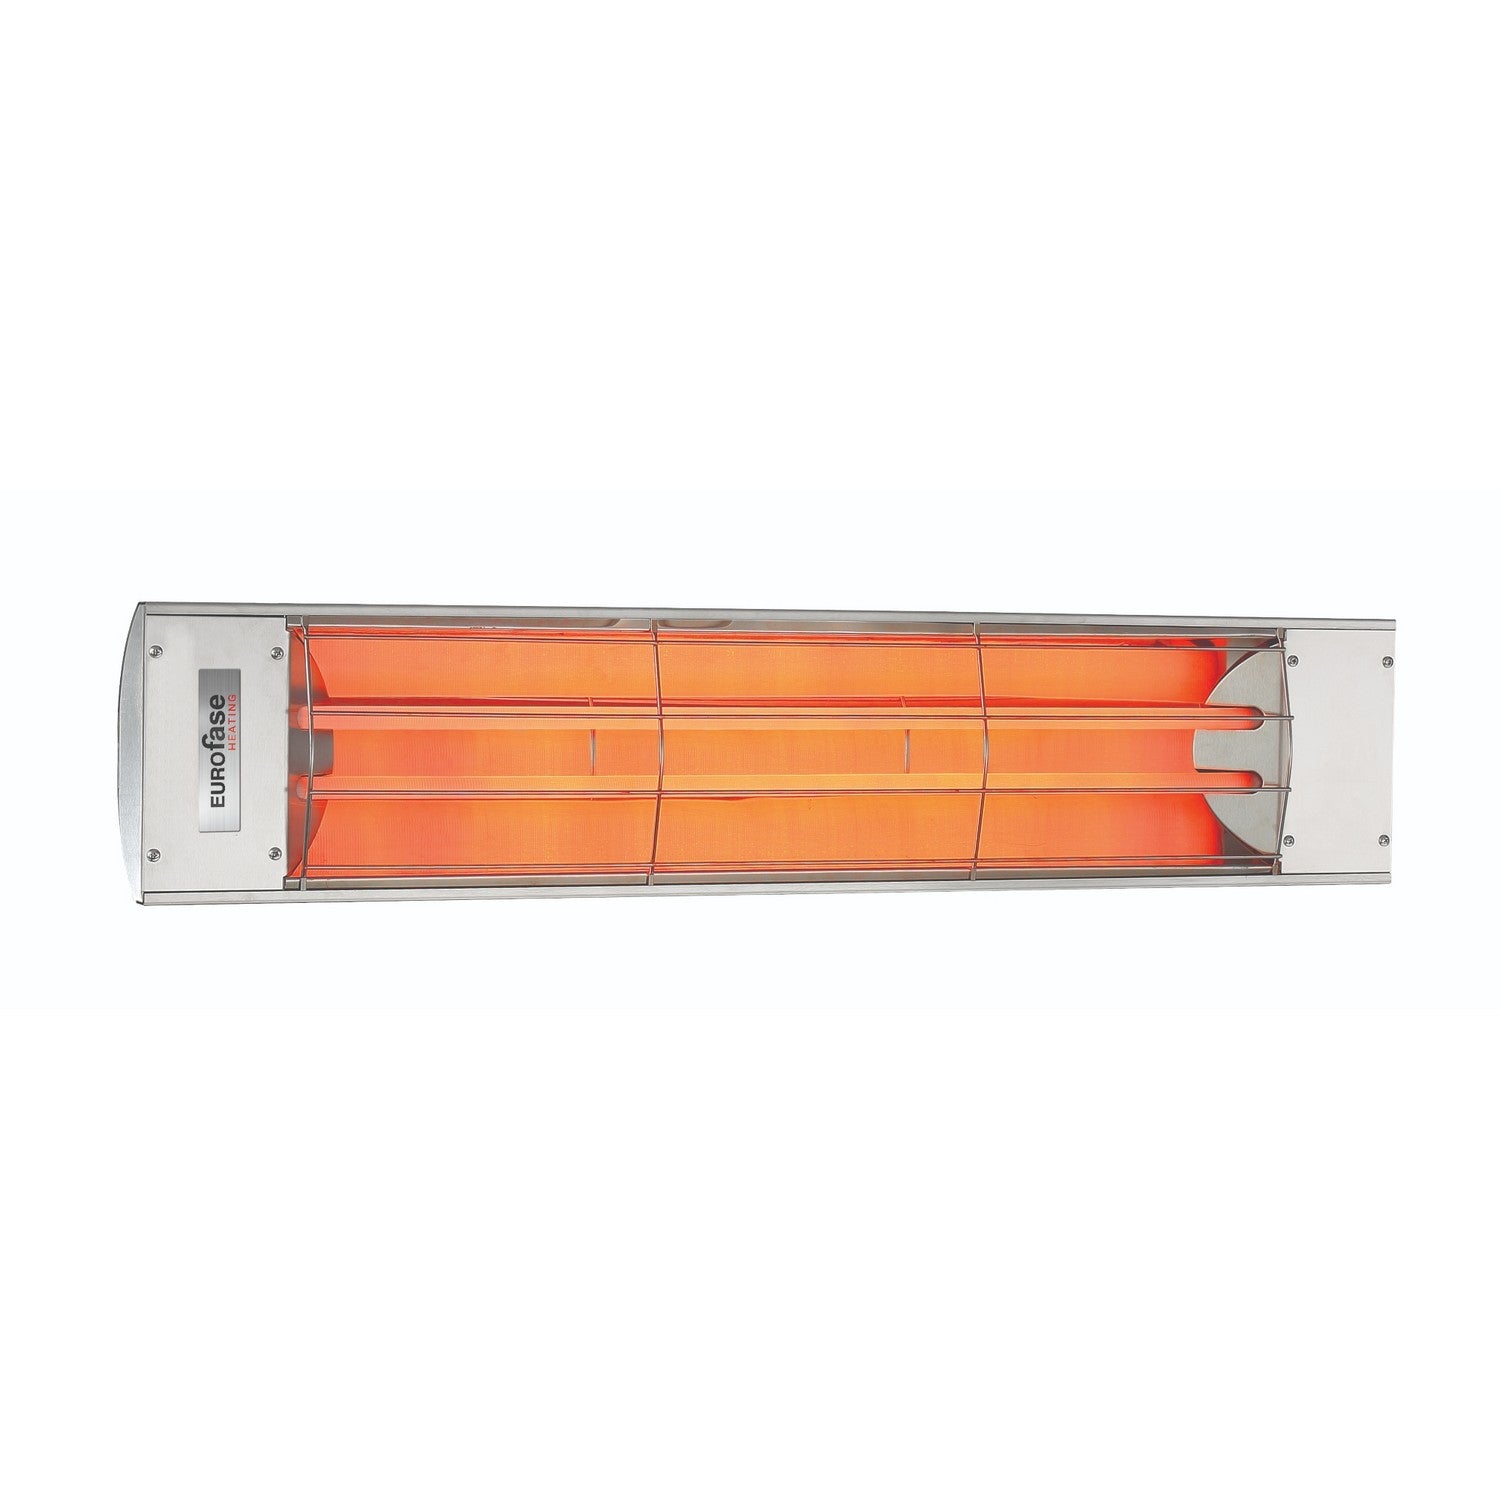 Eurofase - EF40240S - Electric Heater - Stainless Steel